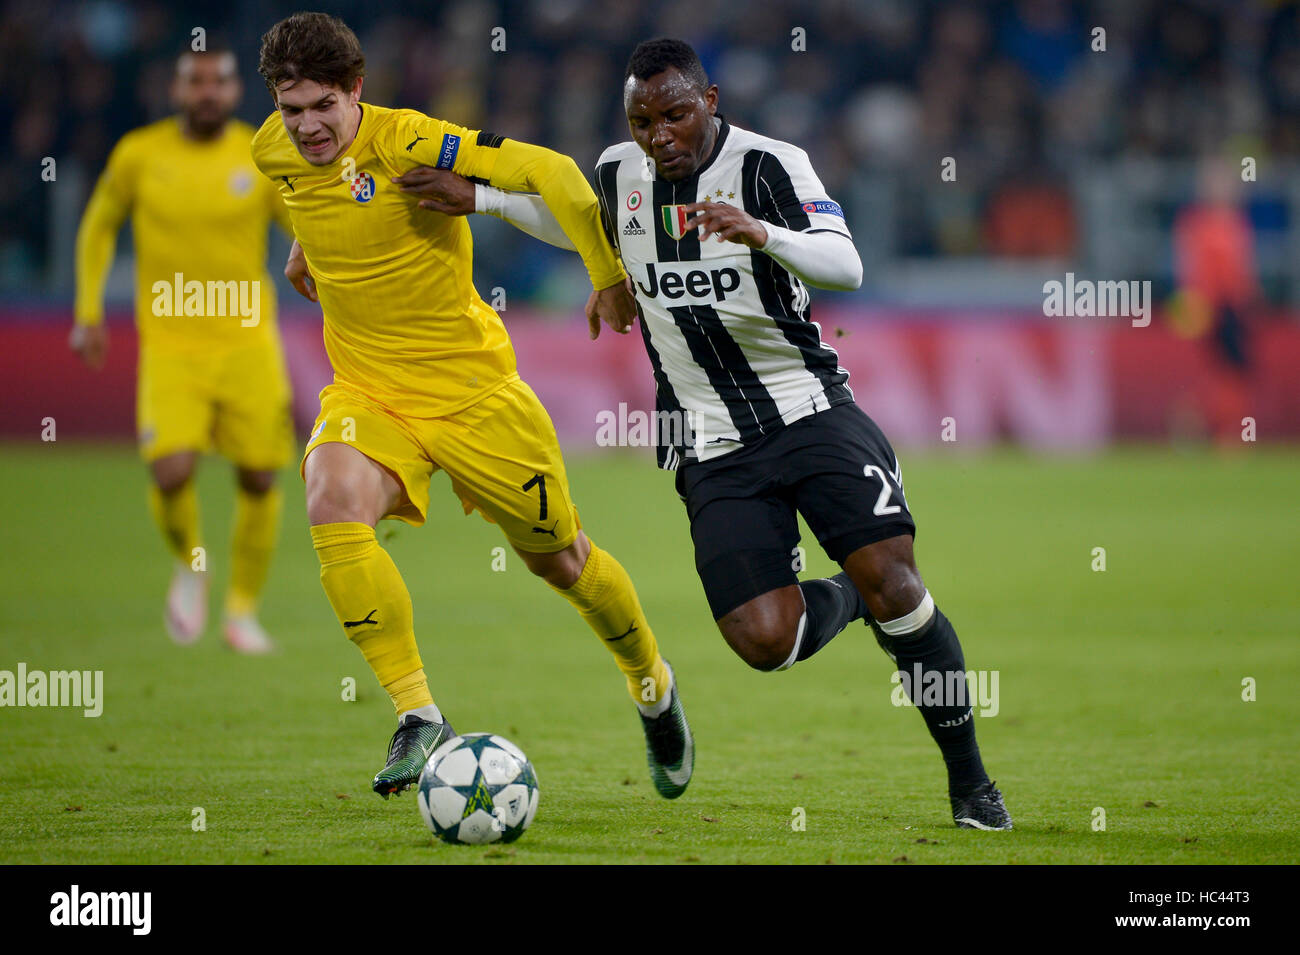 Turin, Italy. 7th Dec, 2016. Mario Situm (left) of GNK Dinamo Zagreb and Kwadwo Asamoah of Juventus FC compete for the ball during the UEFA Champions League Group H football match between Juventus FC and GNK Dinamo Zagreb. Credit:  Nicolò Campo/Alamy Live News Stock Photo